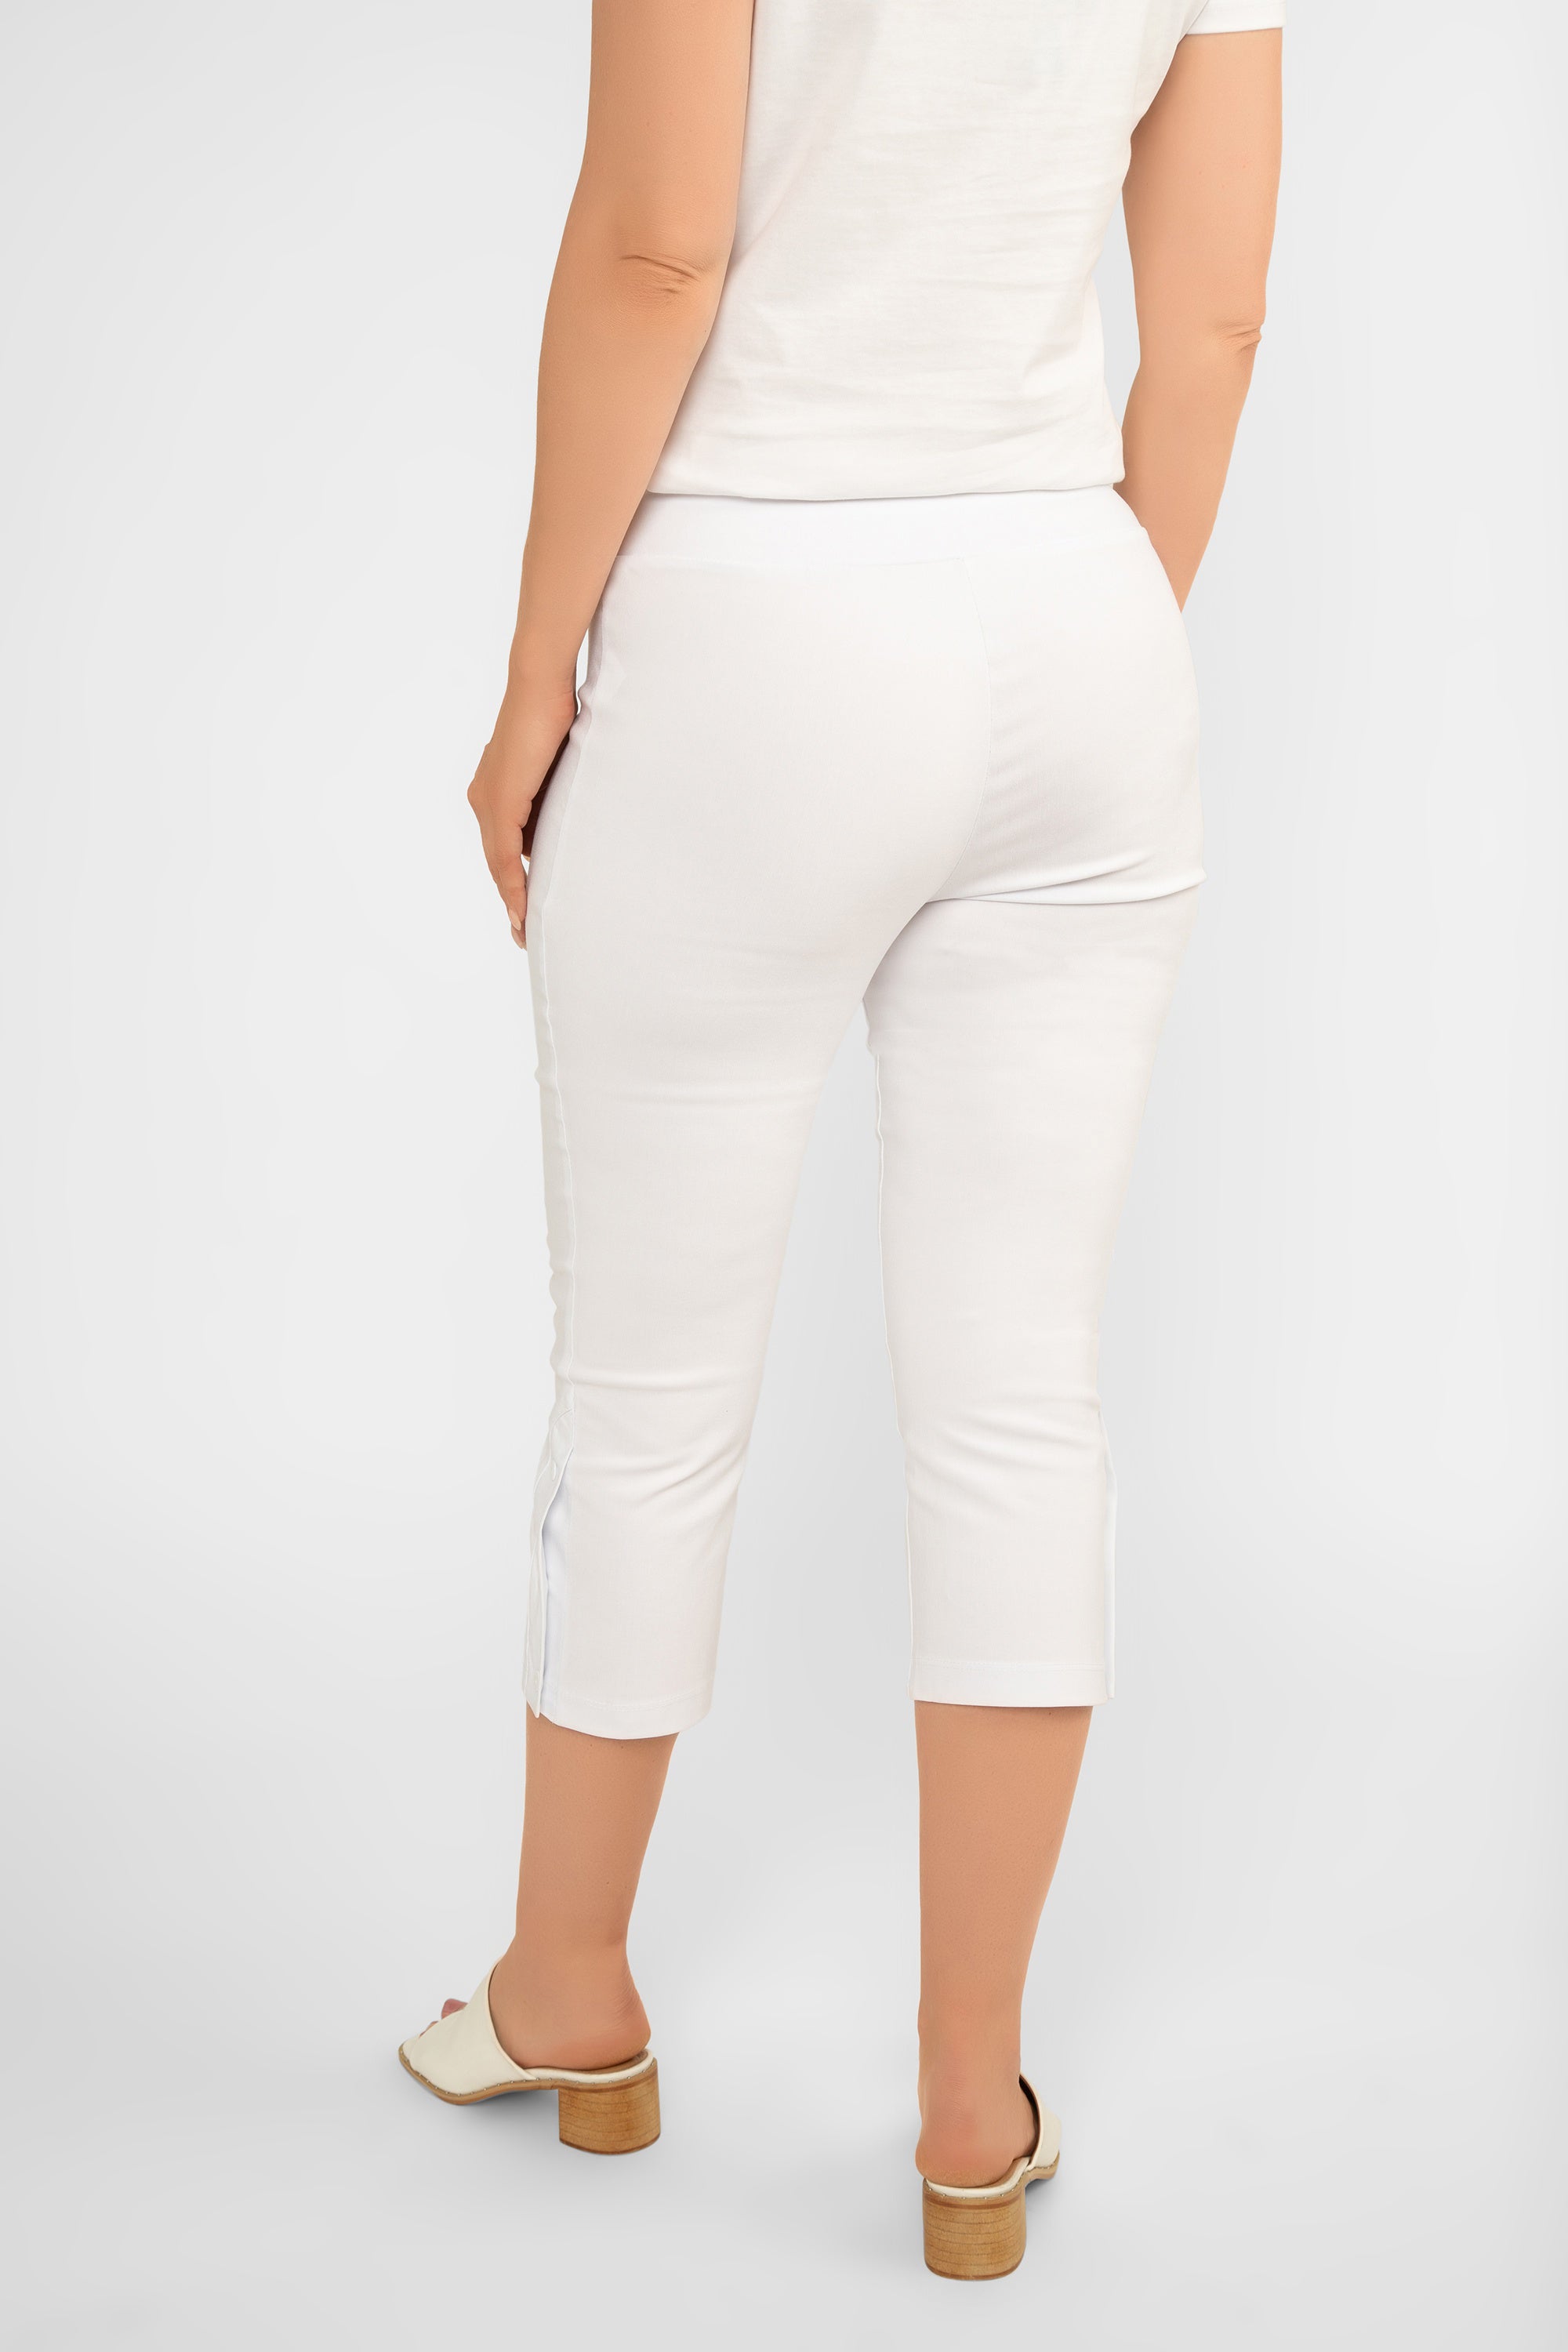 Back view of Picadilly (F M959 PR)  Women's Slim Fit Capris with button trim on hem in Capris  BluePicadilly (F M959 PR Women's Slim Fit Capris with button trim on hem in  White